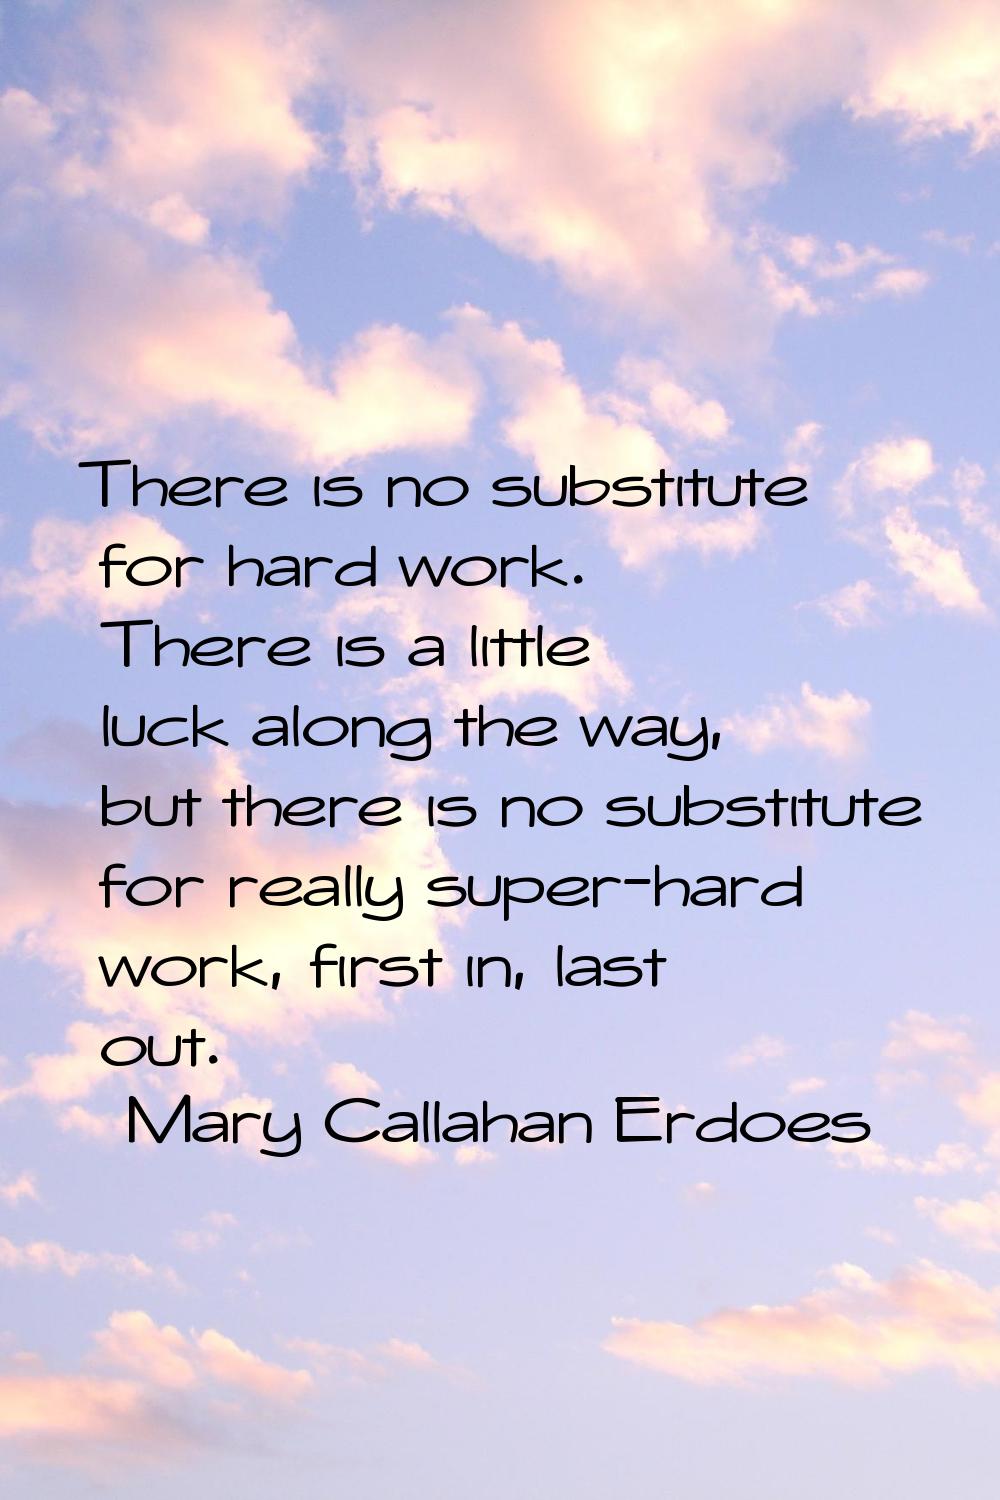 There is no substitute for hard work. There is a little luck along the way, but there is no substit